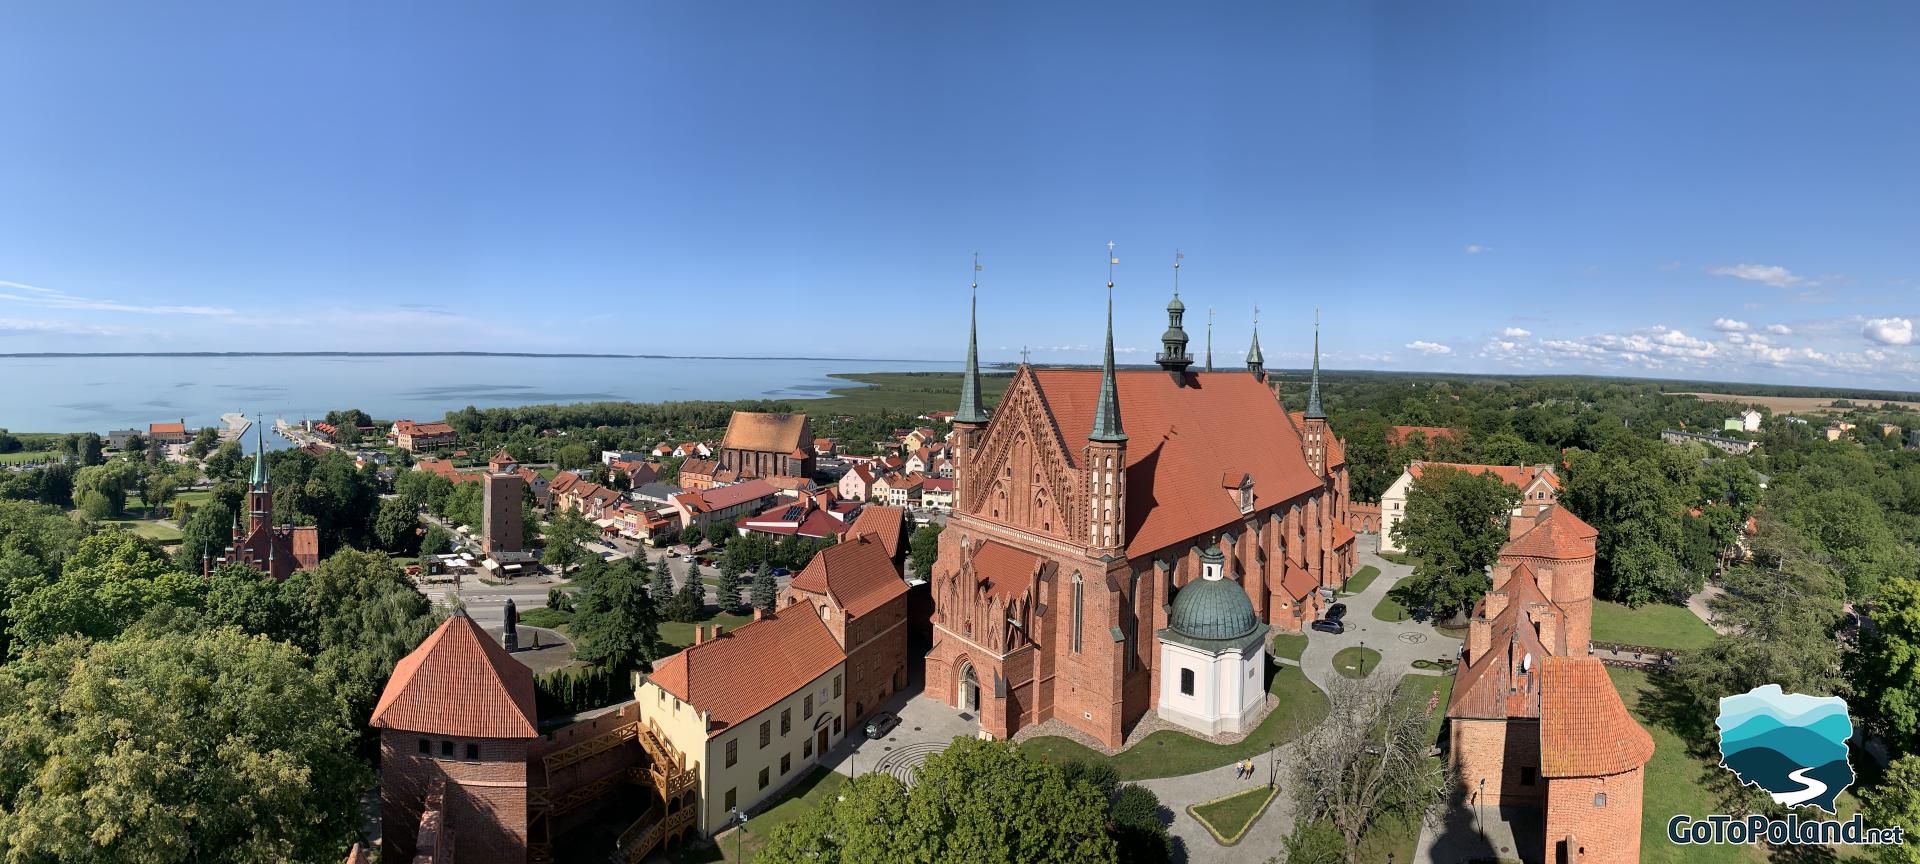 Panorama of the town - you can see a brick church and a fragment of the Vistula Lagoon